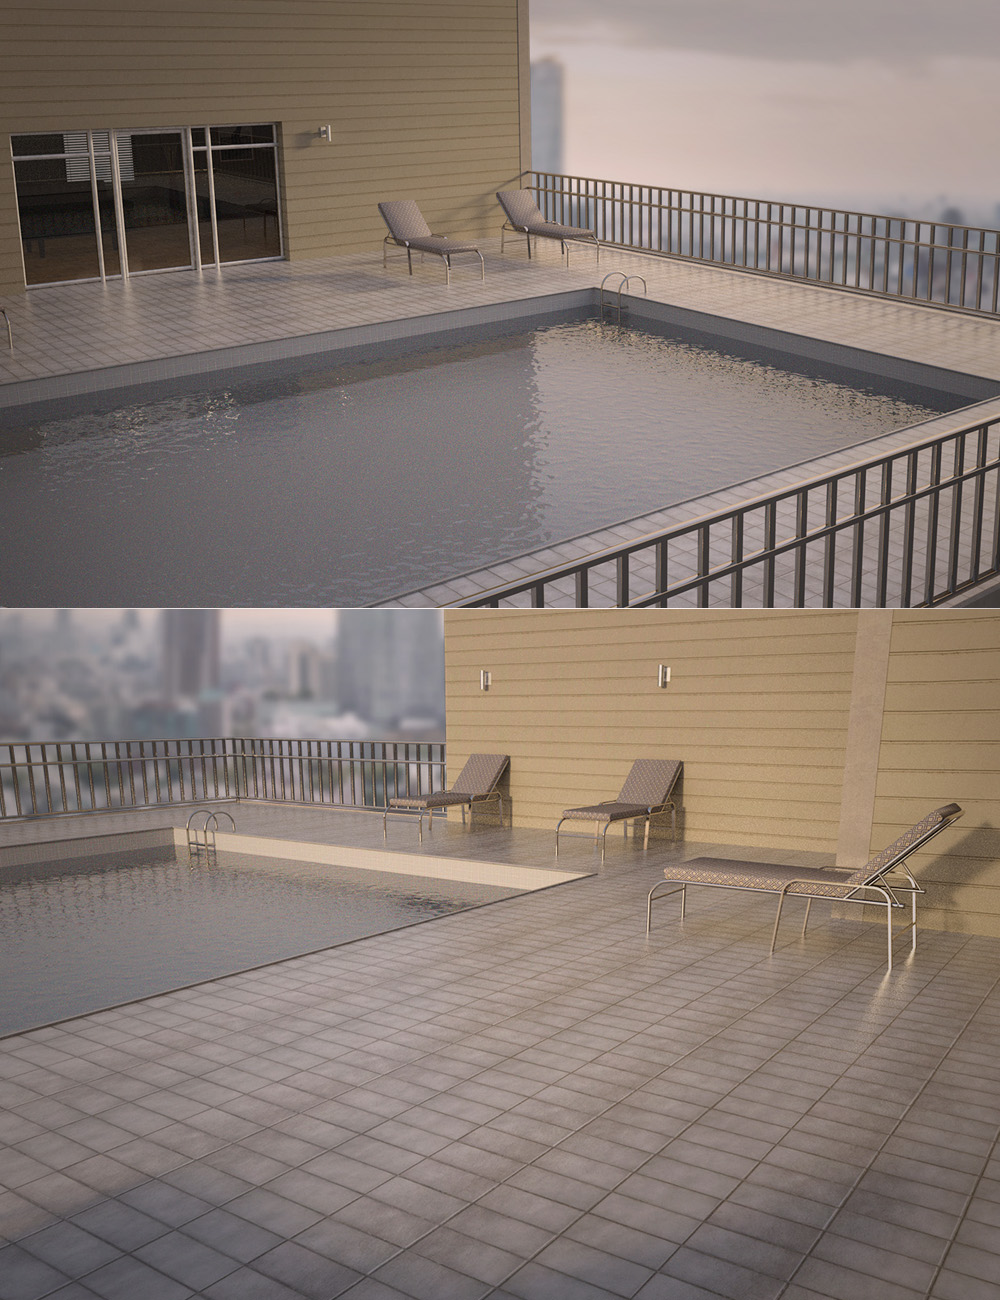 Apartment Patio with Pool by: , 3D Models by Daz 3D